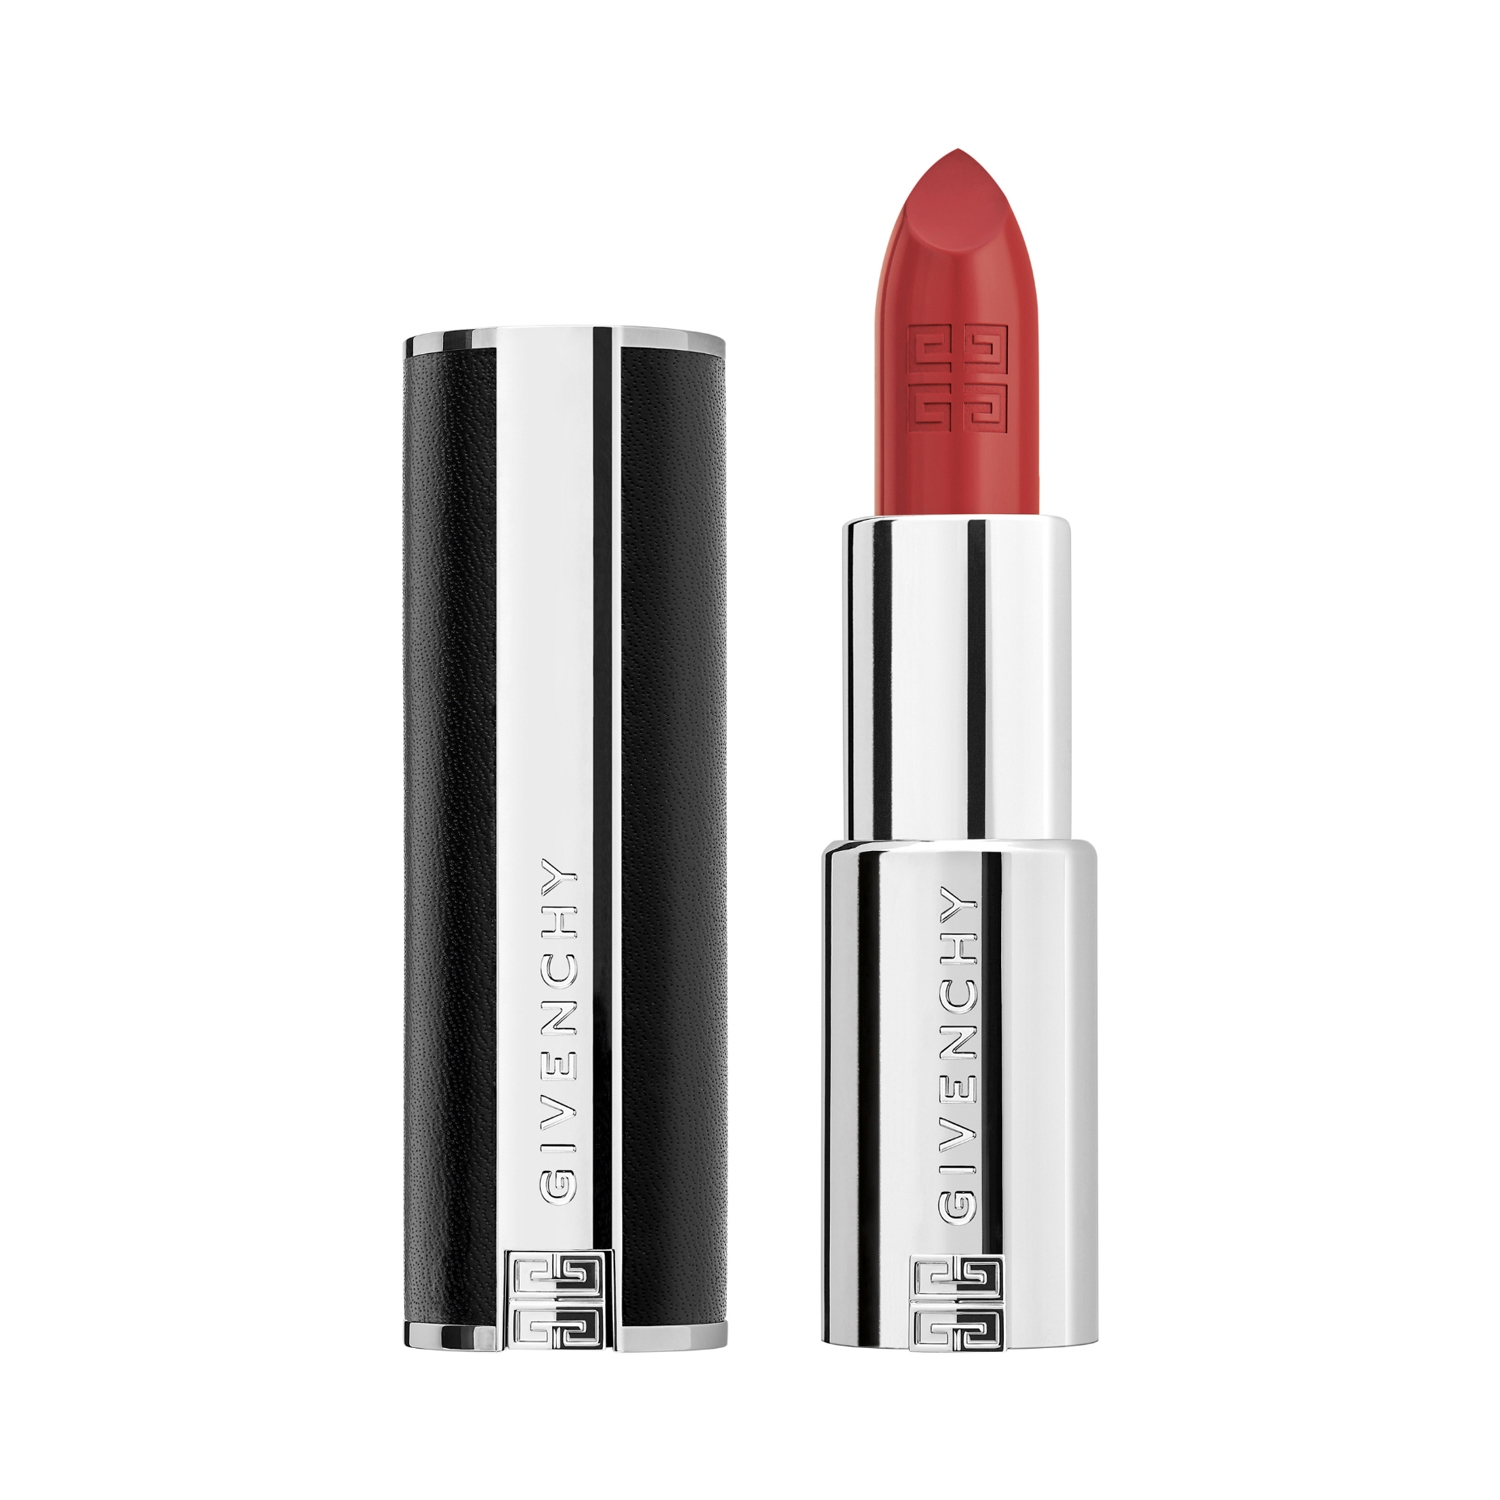 Givenchy | Givenchy Le Rouge Interdit Intense Silk Lipstick - N 228 Rose Fume (3.4g)